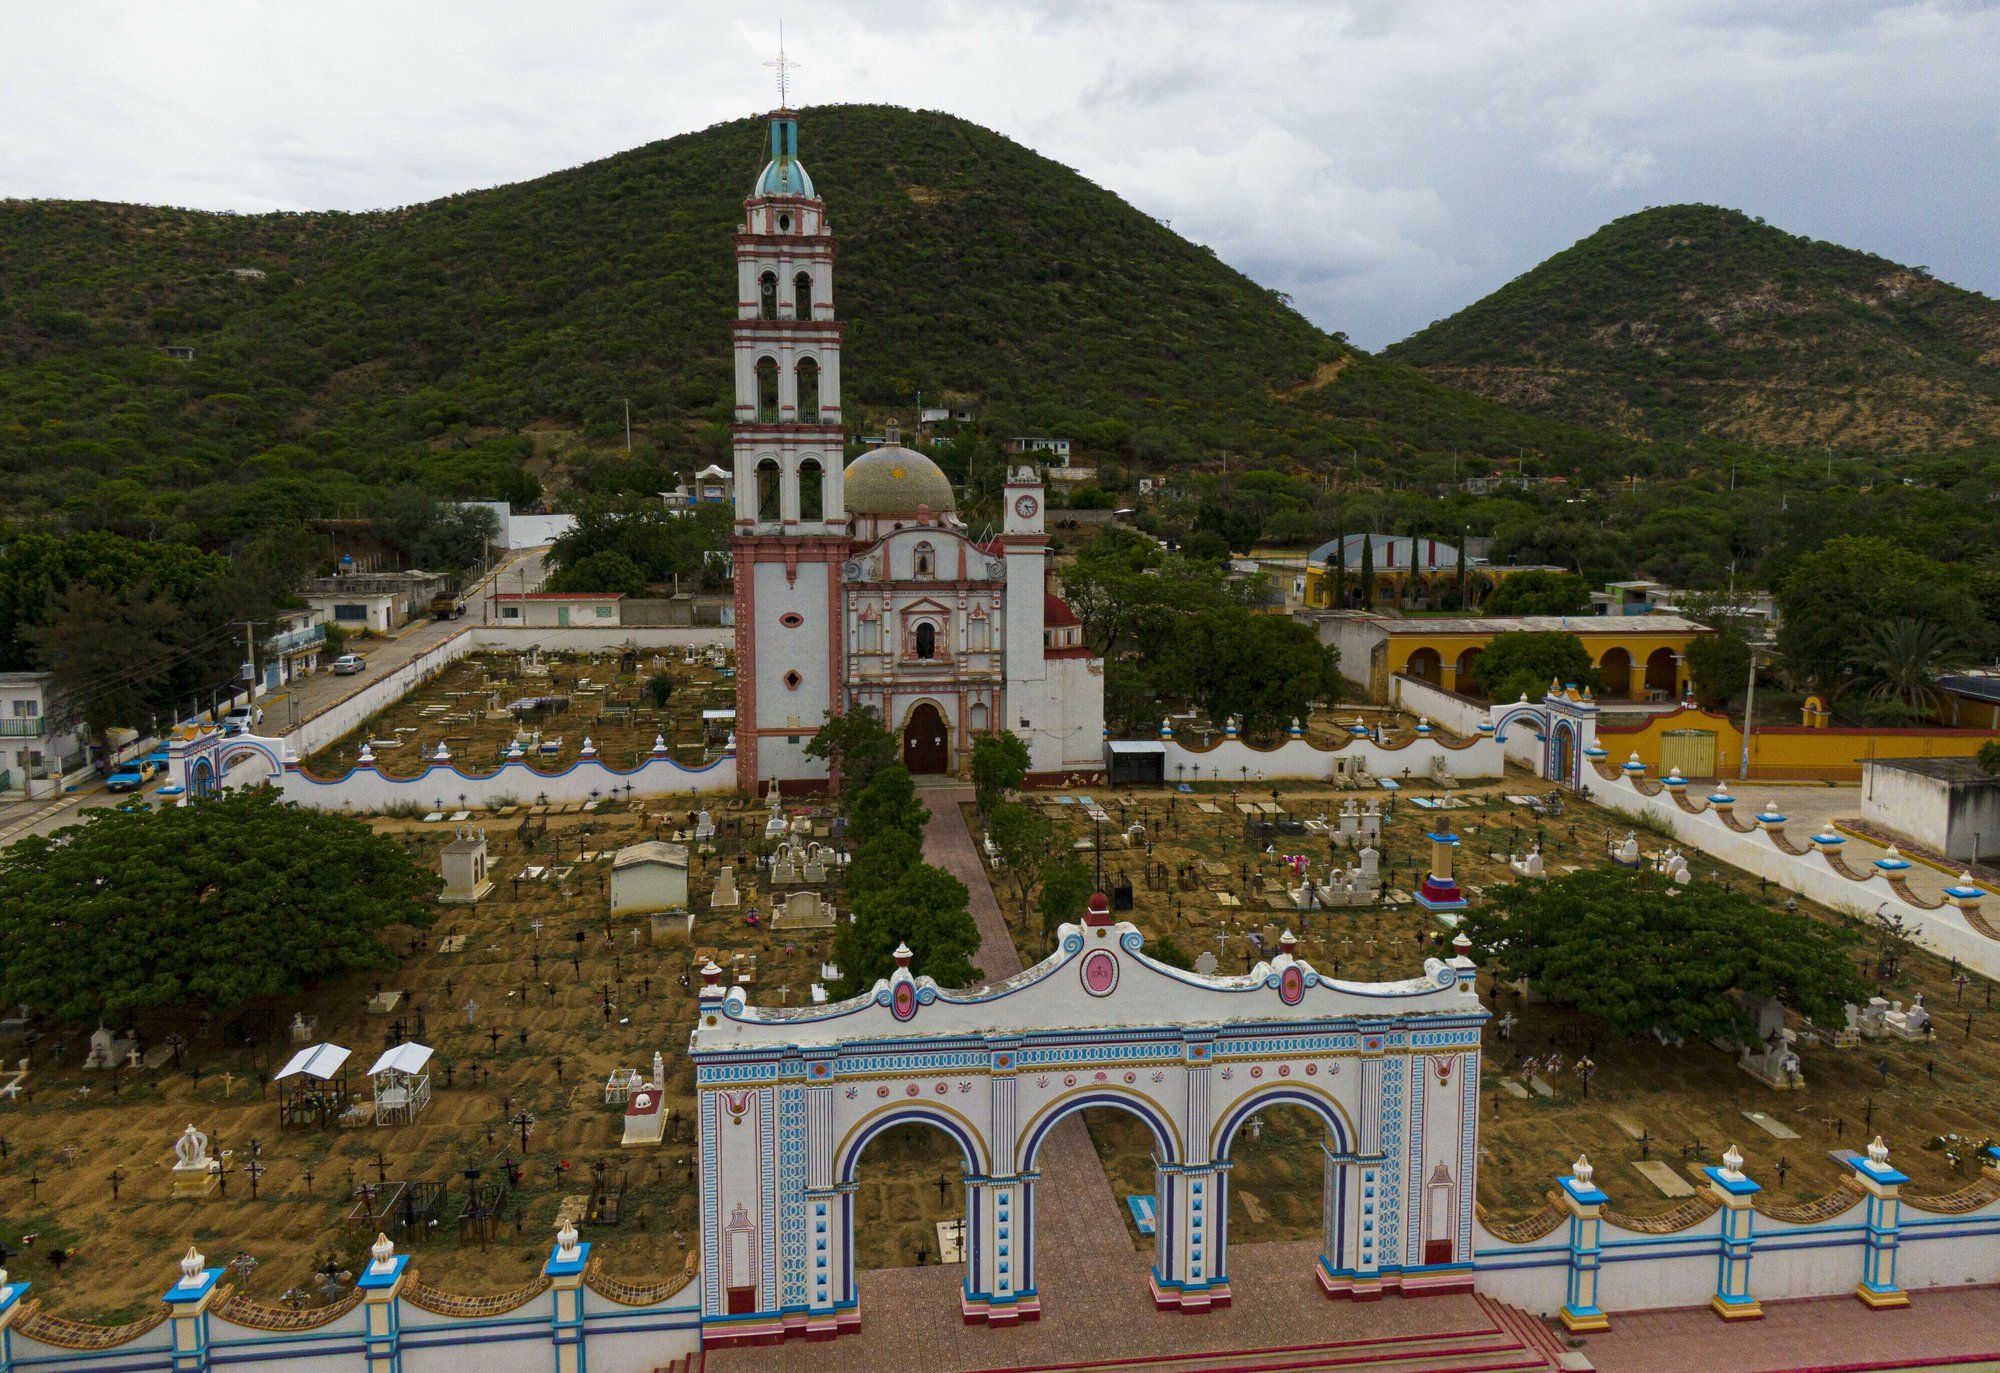 Graves surround the church of San Jeronimo Xayacatlan, Mexico, a town from which nearly a third of residents have emigrated to New York, Friday, June 26, 2020. Most departed in the 1990s or the first decade of the 21st century, leaving behind farm work to cross illegally into the United States. Image by Fernando Llano/AP Photo. Mexico, 2020.